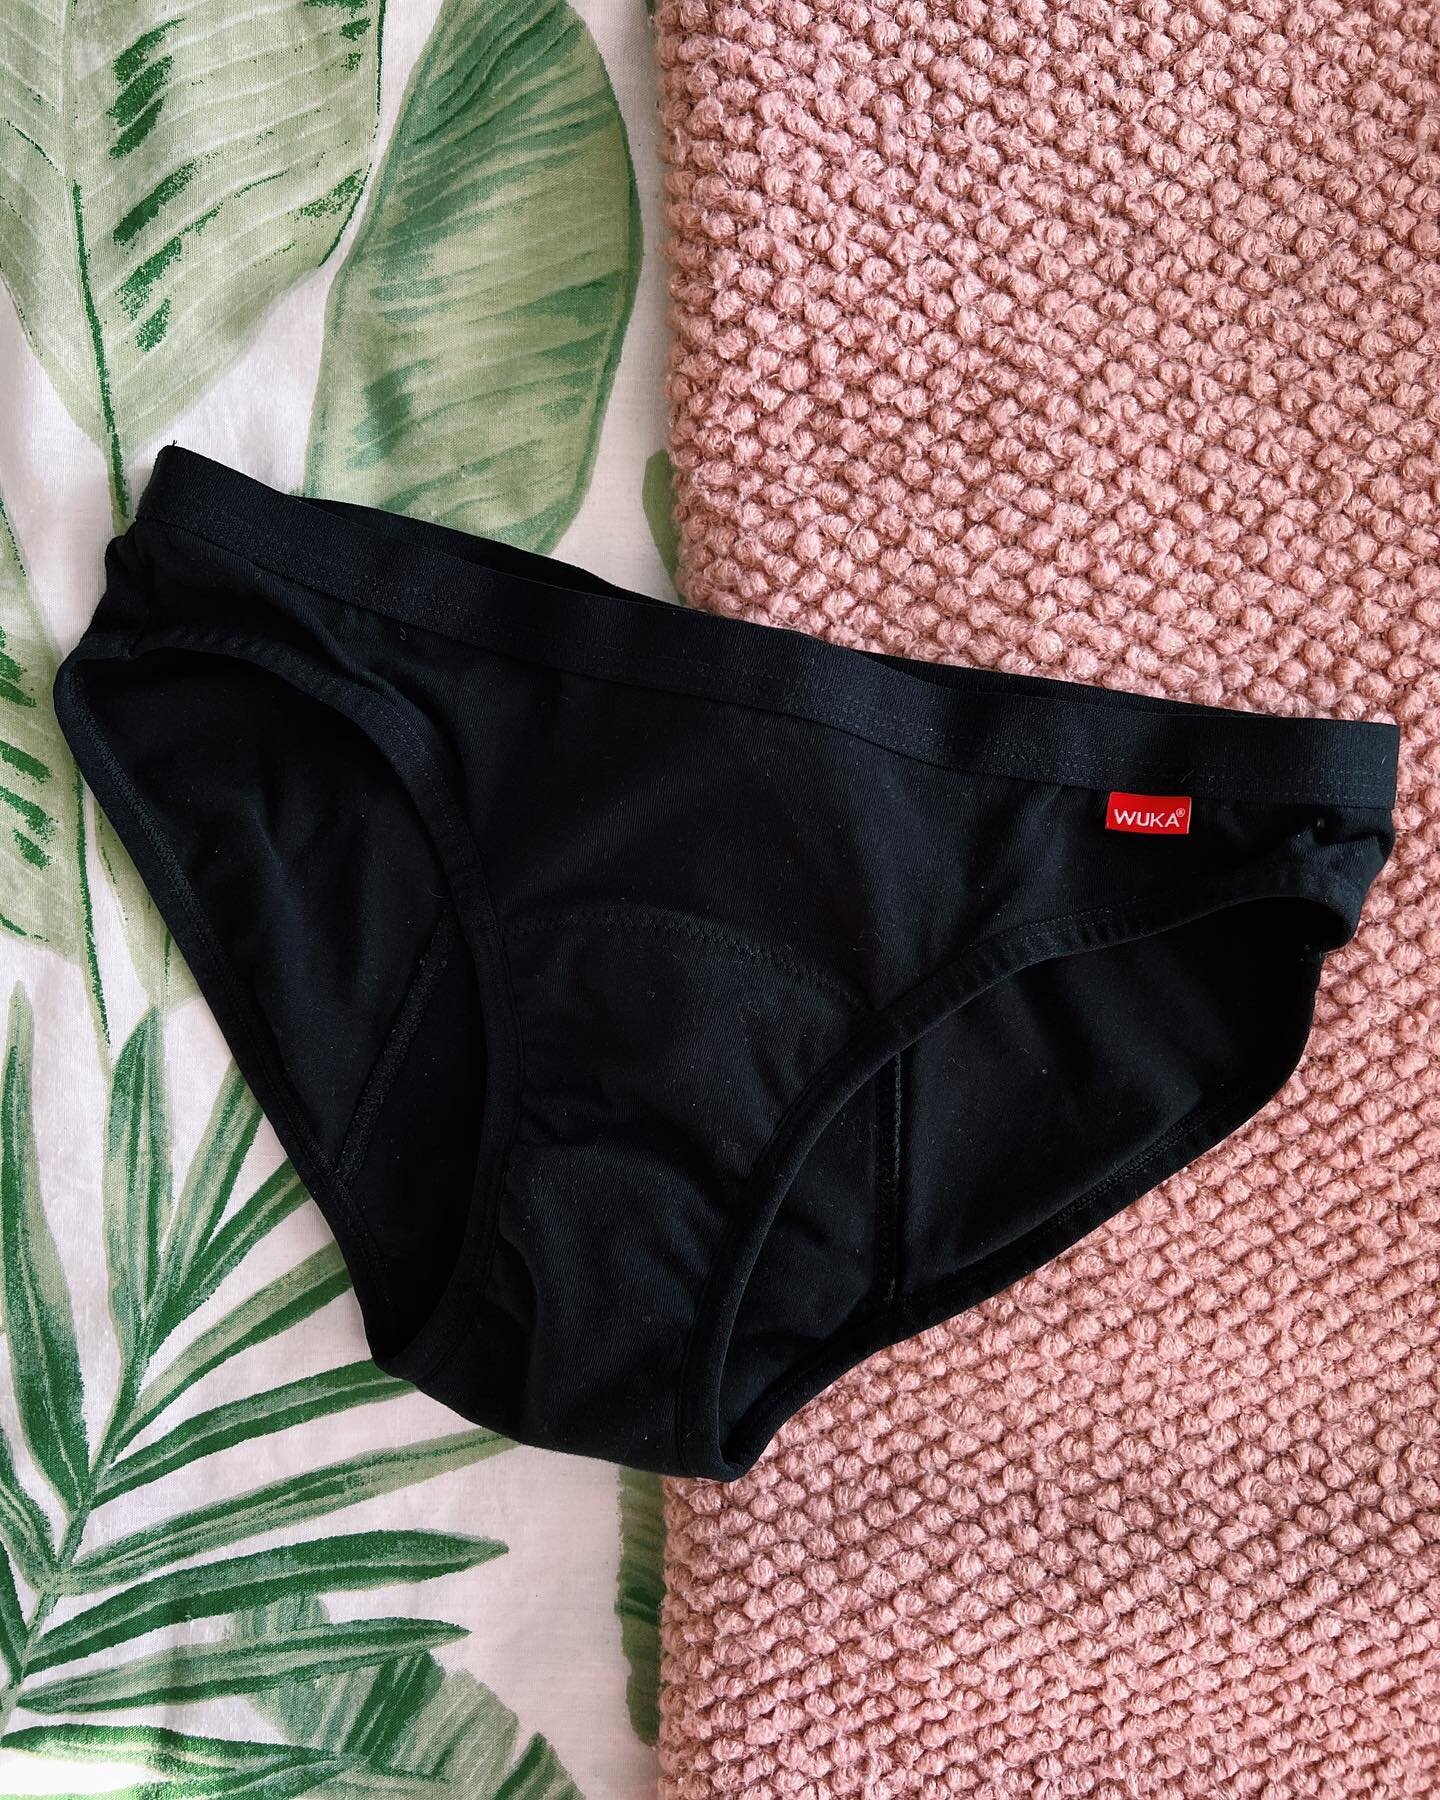 What a life changing experience period pants are. 🙌🏼 I&rsquo;d heard people talking about them, contemplated it and then after a good discussion with a friend looked into getting a few pairs to try myself. 

Prior to pants I used reusable pads, and